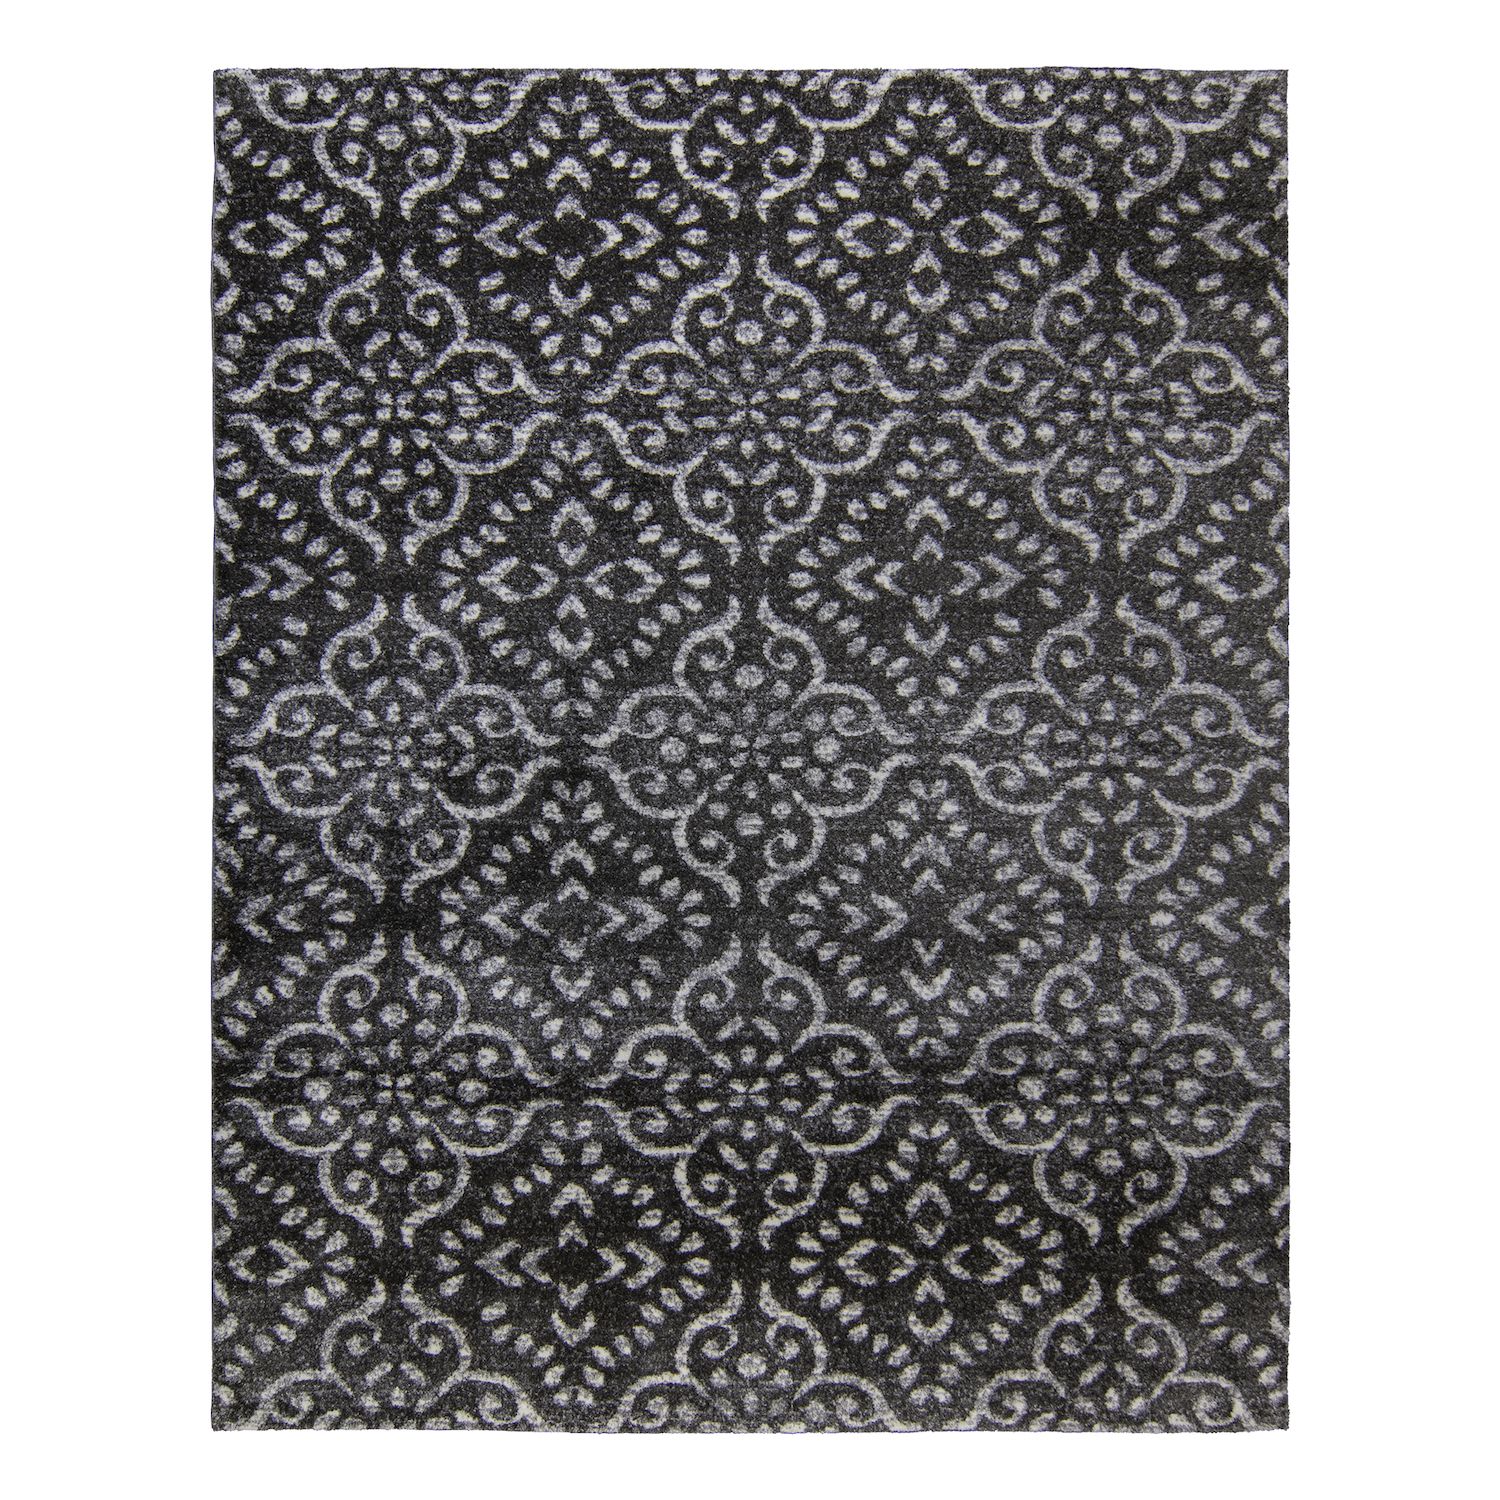 Image for Drexel Heritage Lanza Lavi Gray Area Rug at Kohl's.